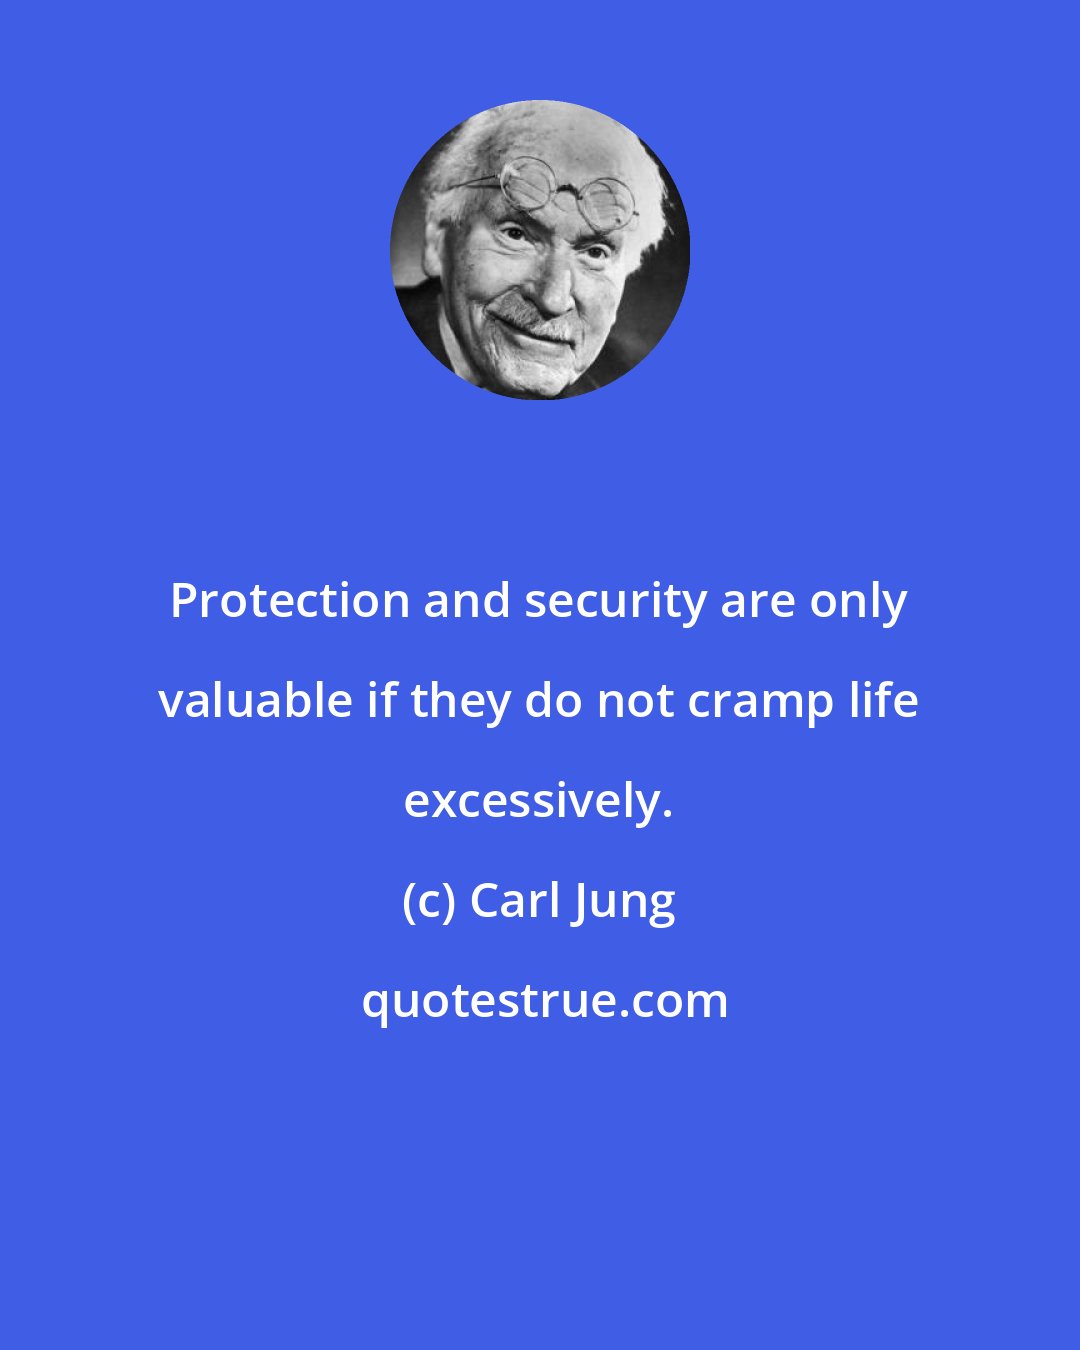 Carl Jung: Protection and security are only valuable if they do not cramp life excessively.